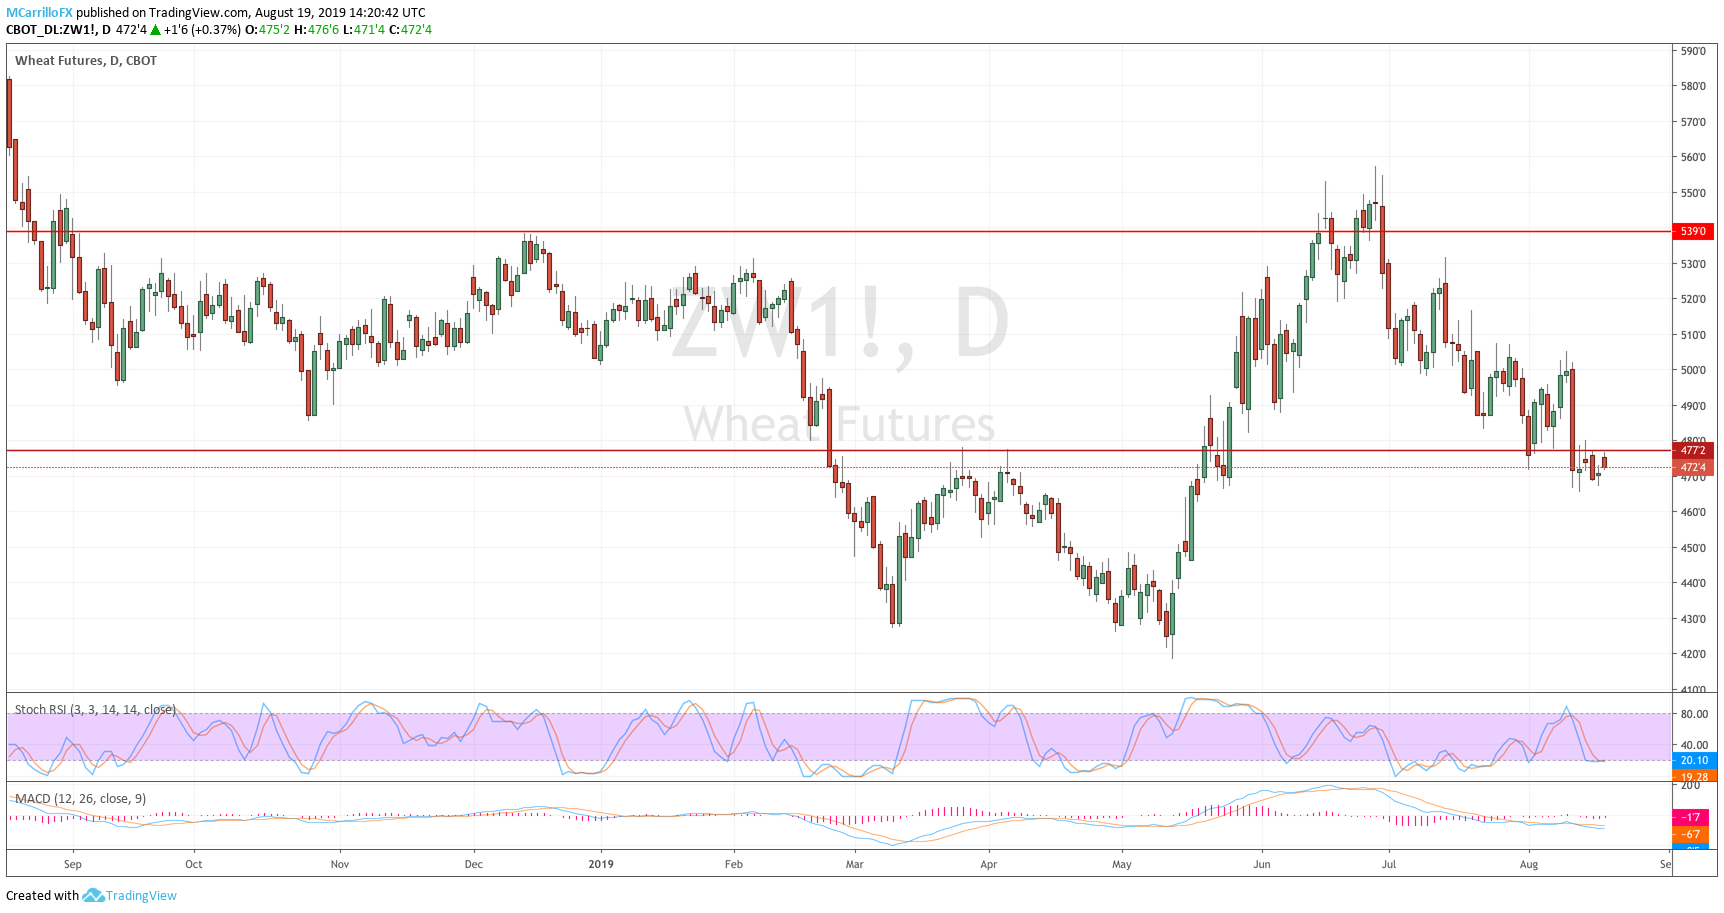 August 19 Wheat daily chart